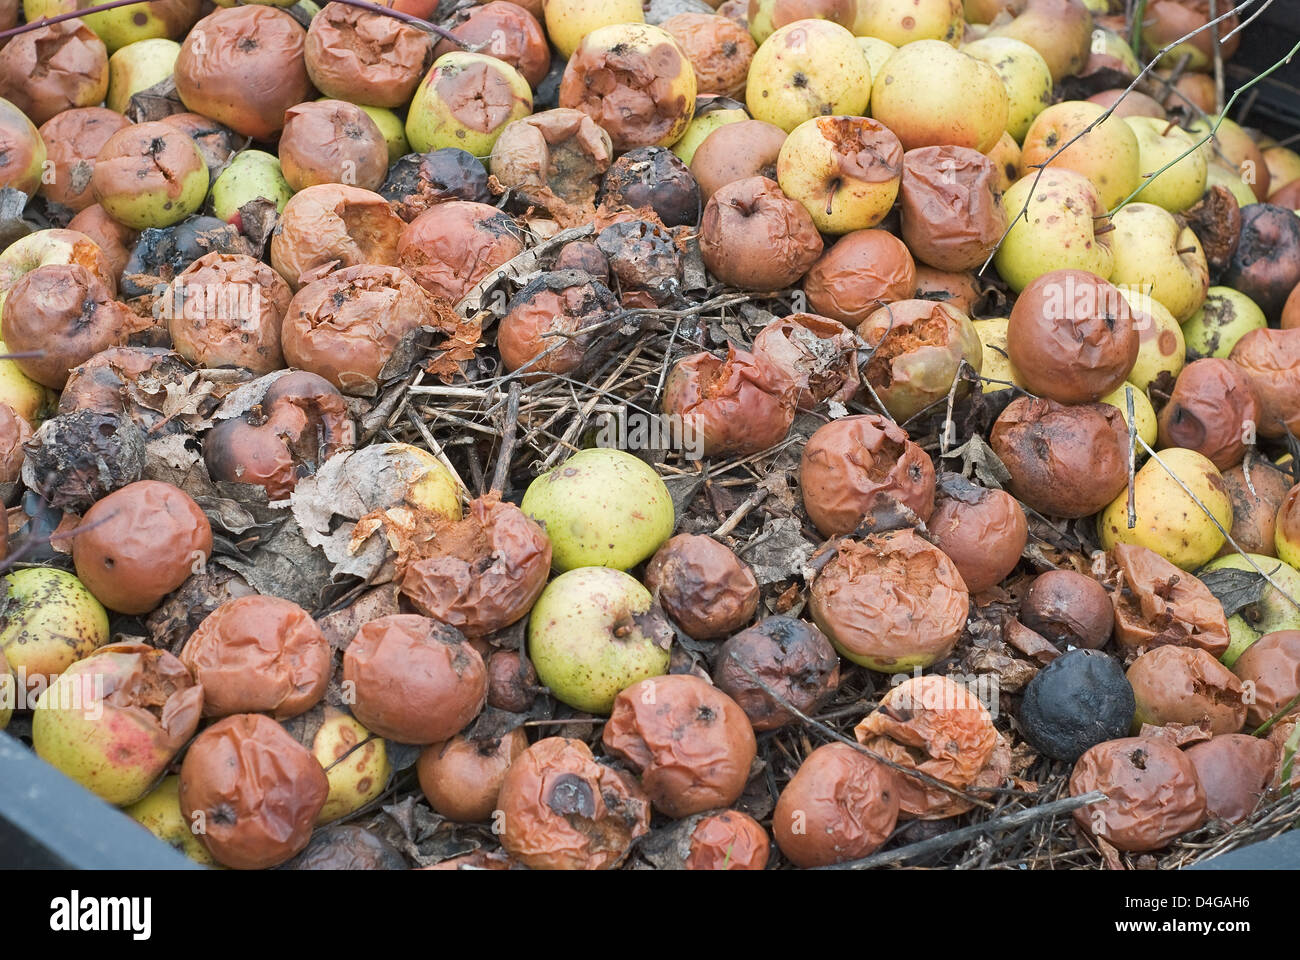 Composting Pile of Rotting Garden Apples as Example of Sustainable Living Stock Photo